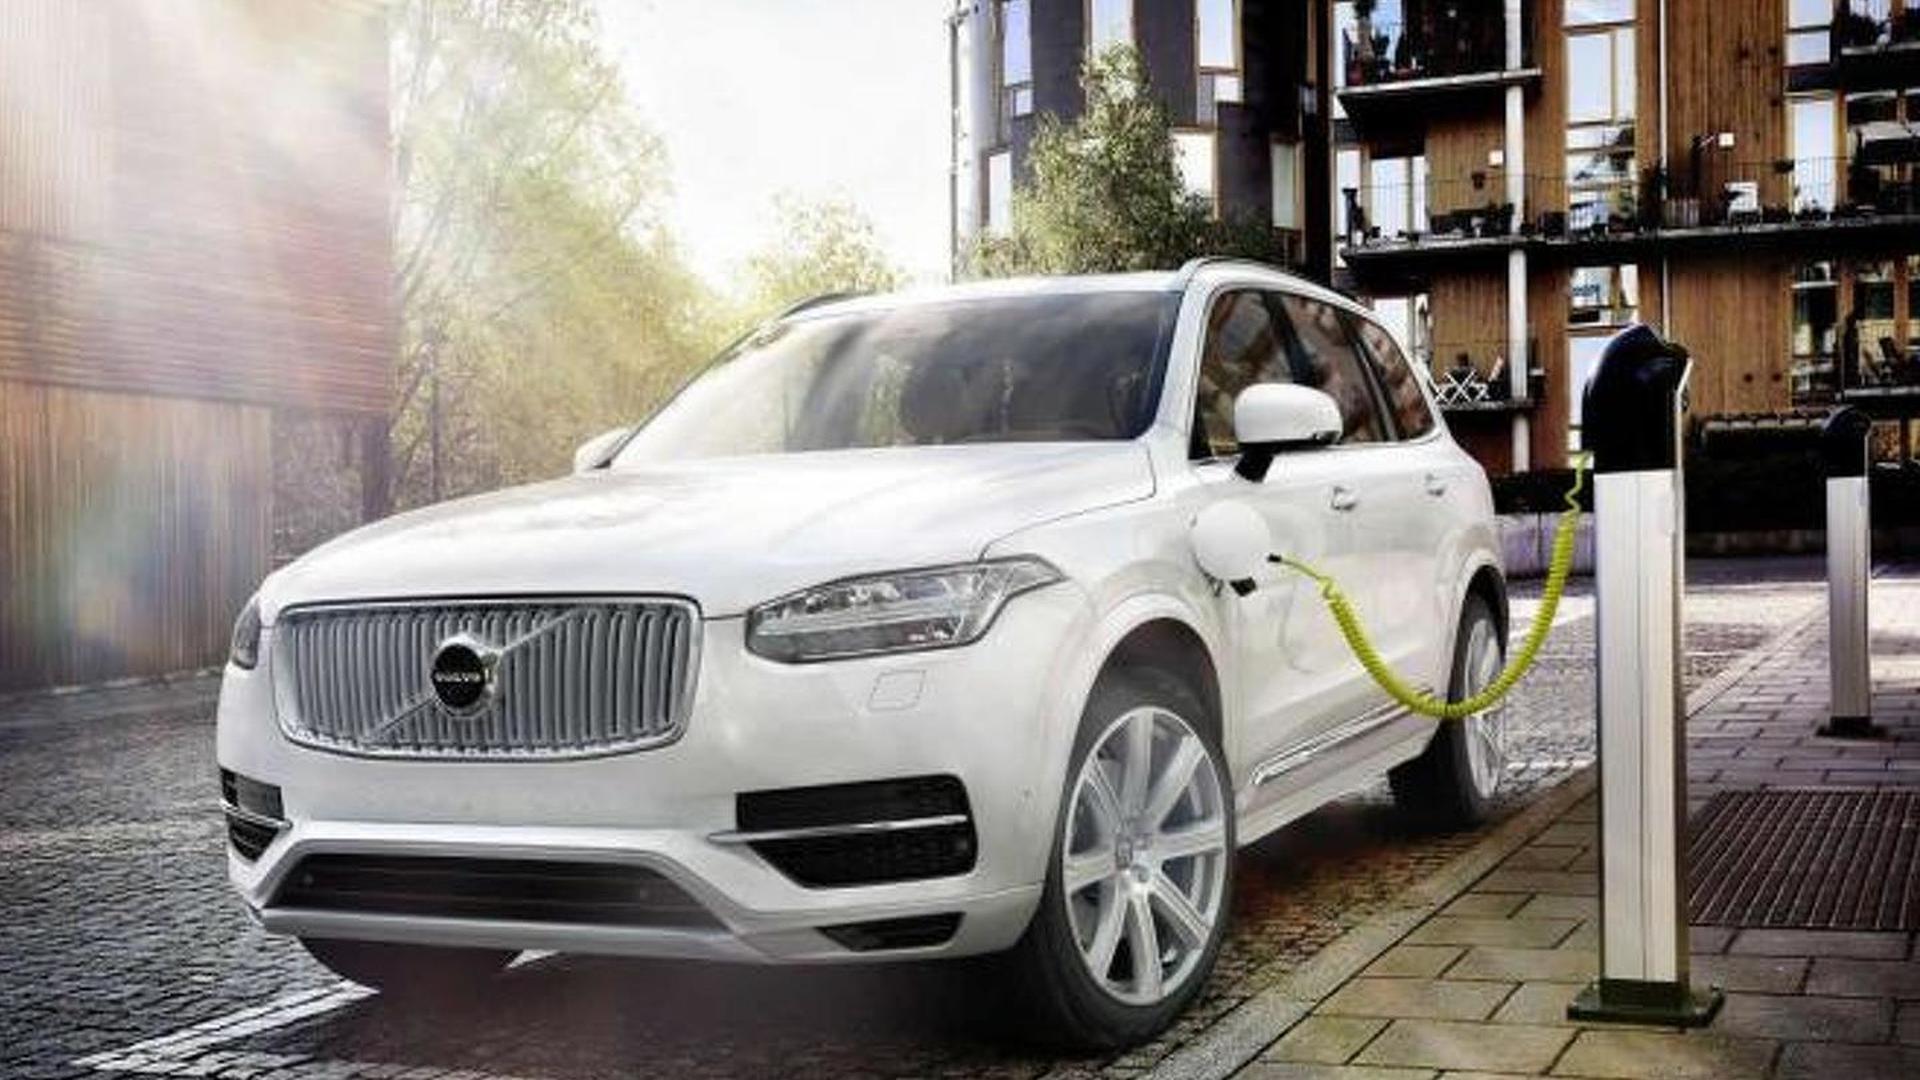 Volvo XC90 SUV official image leaked